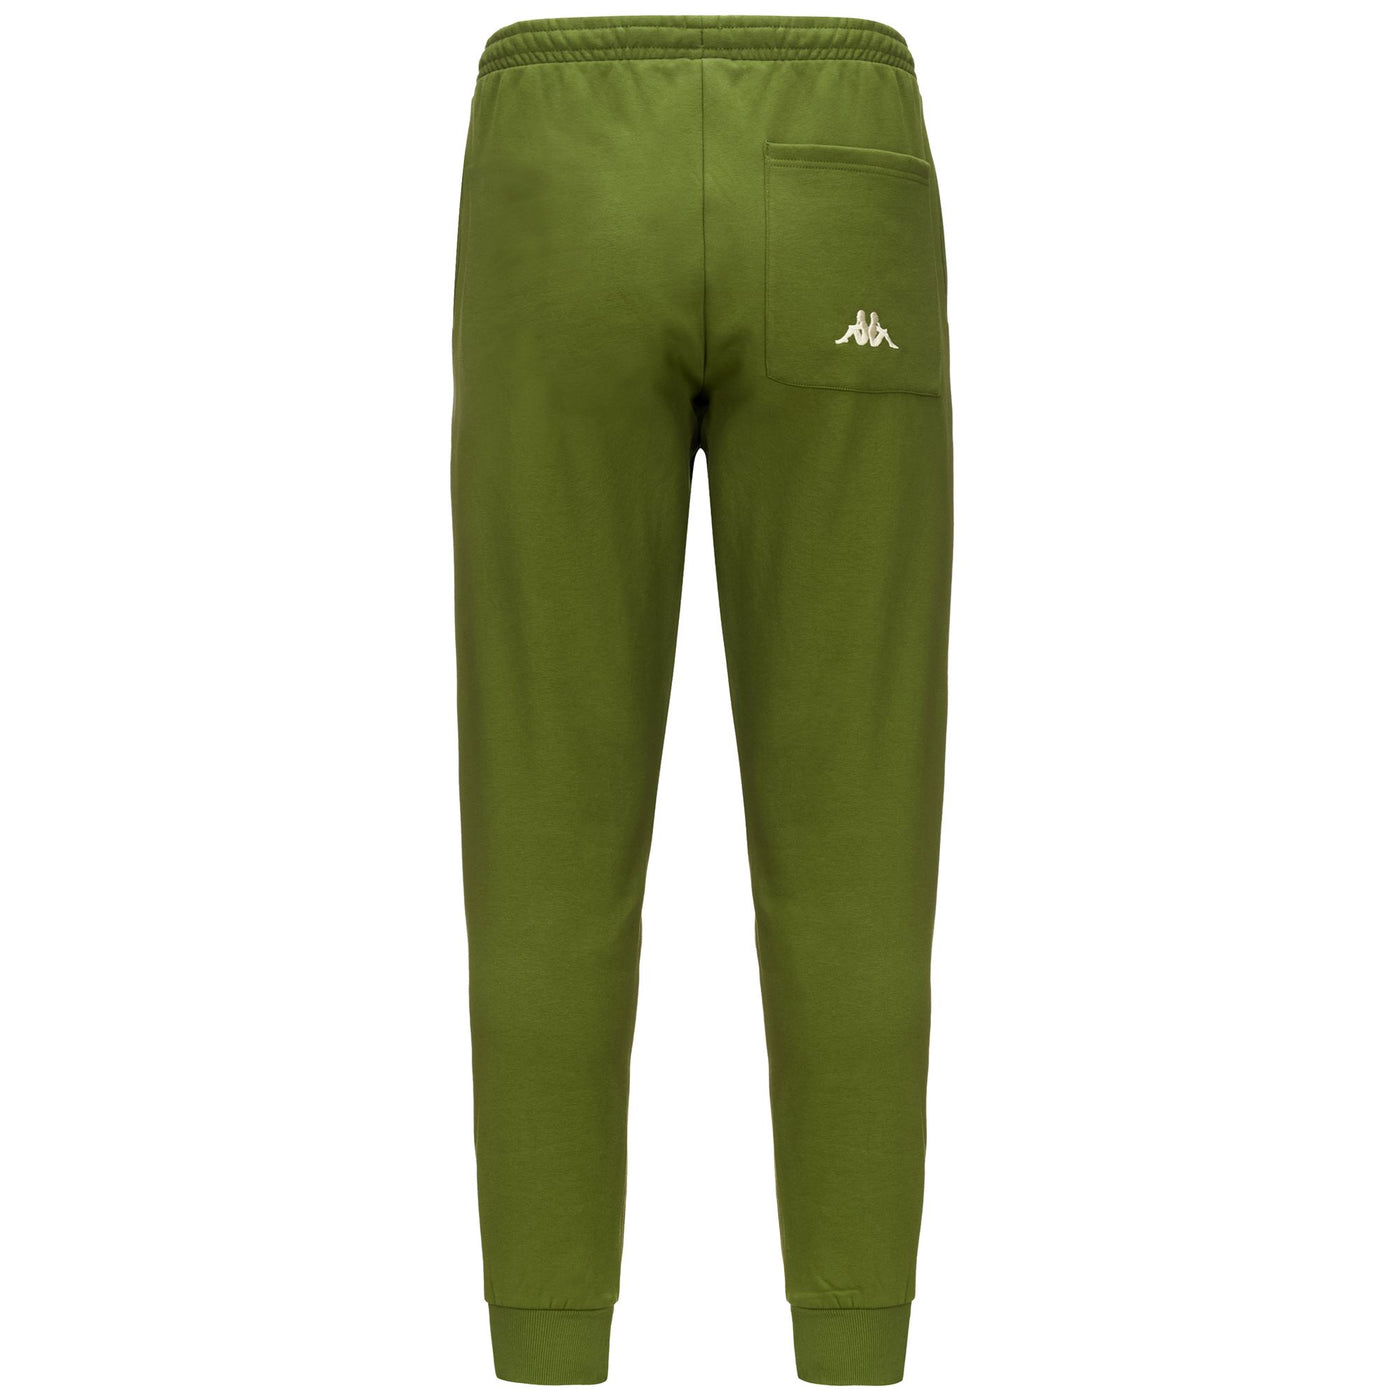 Tracksuit trousers for men and women in asparagus green cotton blend.